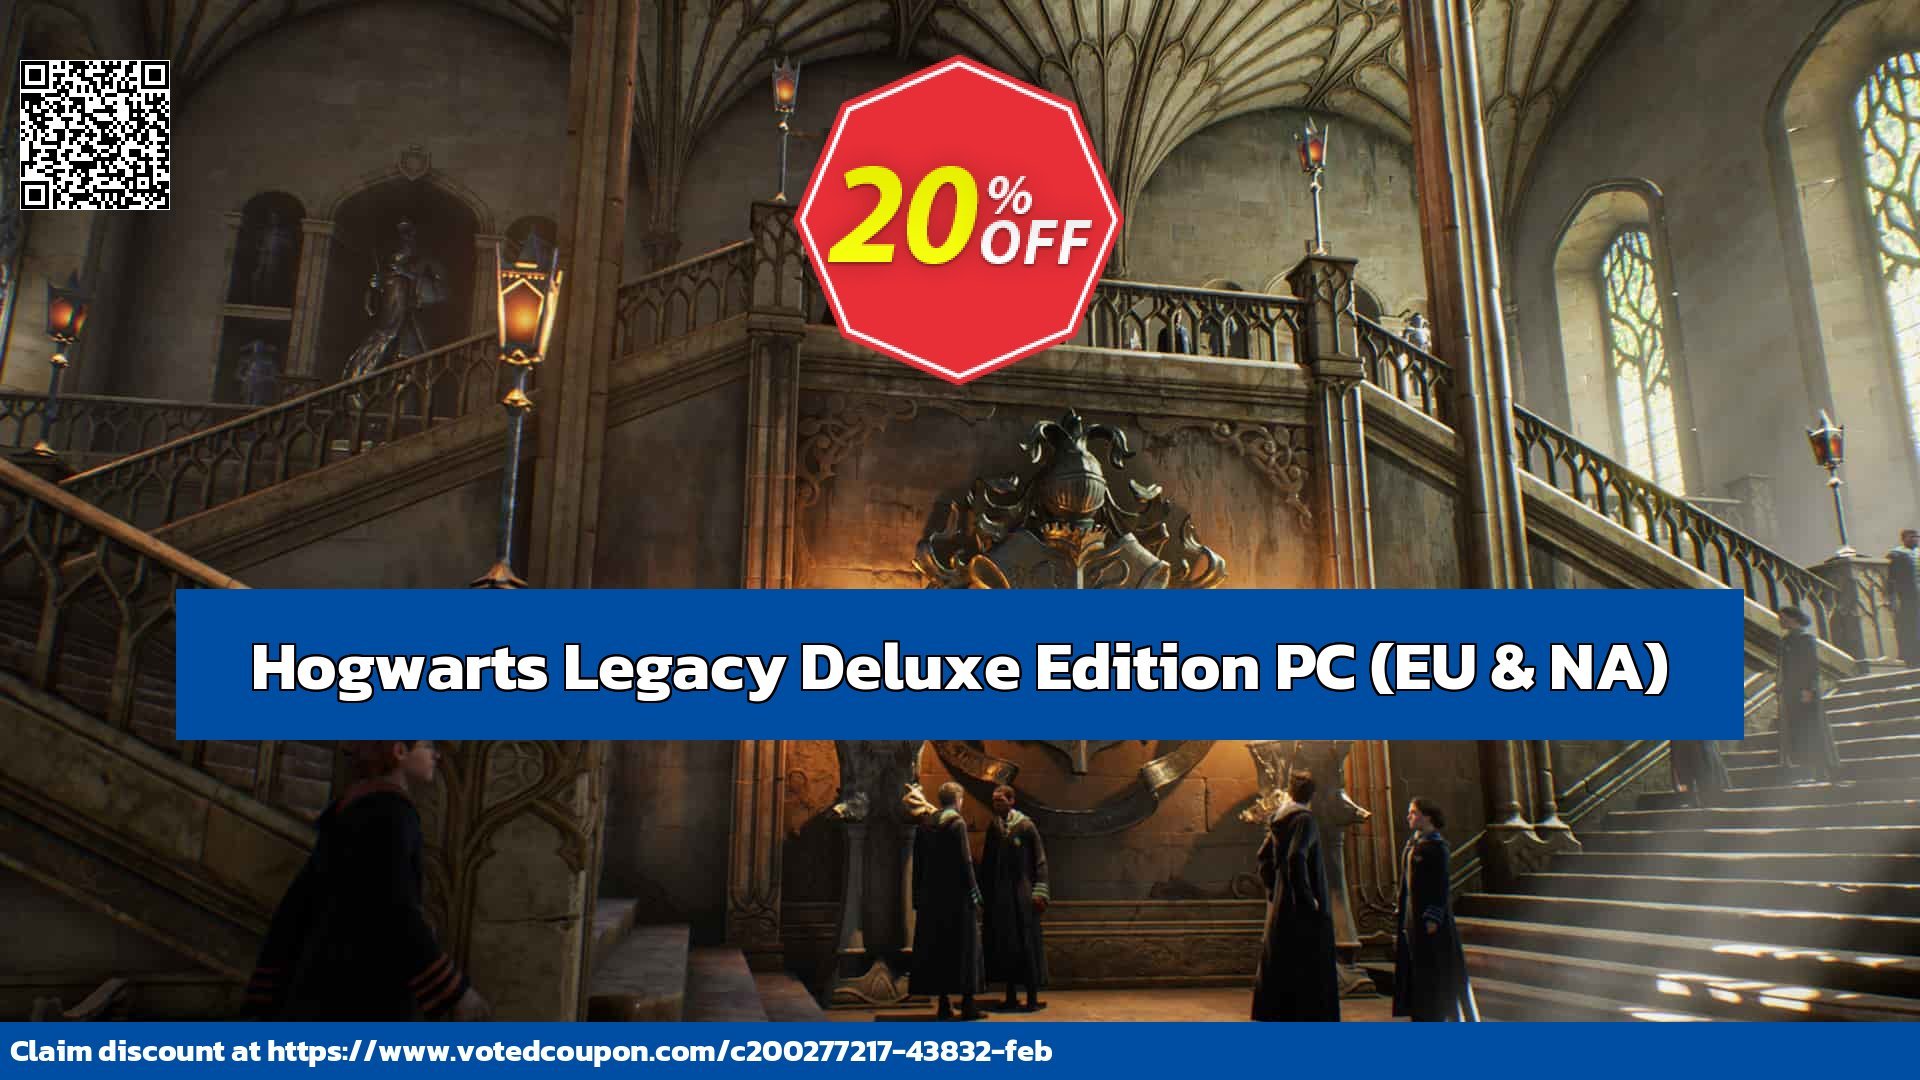 Hogwarts Legacy Deluxe Edition PC, EU & NA  Coupon, discount Hogwarts Legacy Deluxe Edition PC (EU & NA) Deal CDkeys. Promotion: Hogwarts Legacy Deluxe Edition PC (EU & NA) Exclusive Sale offer